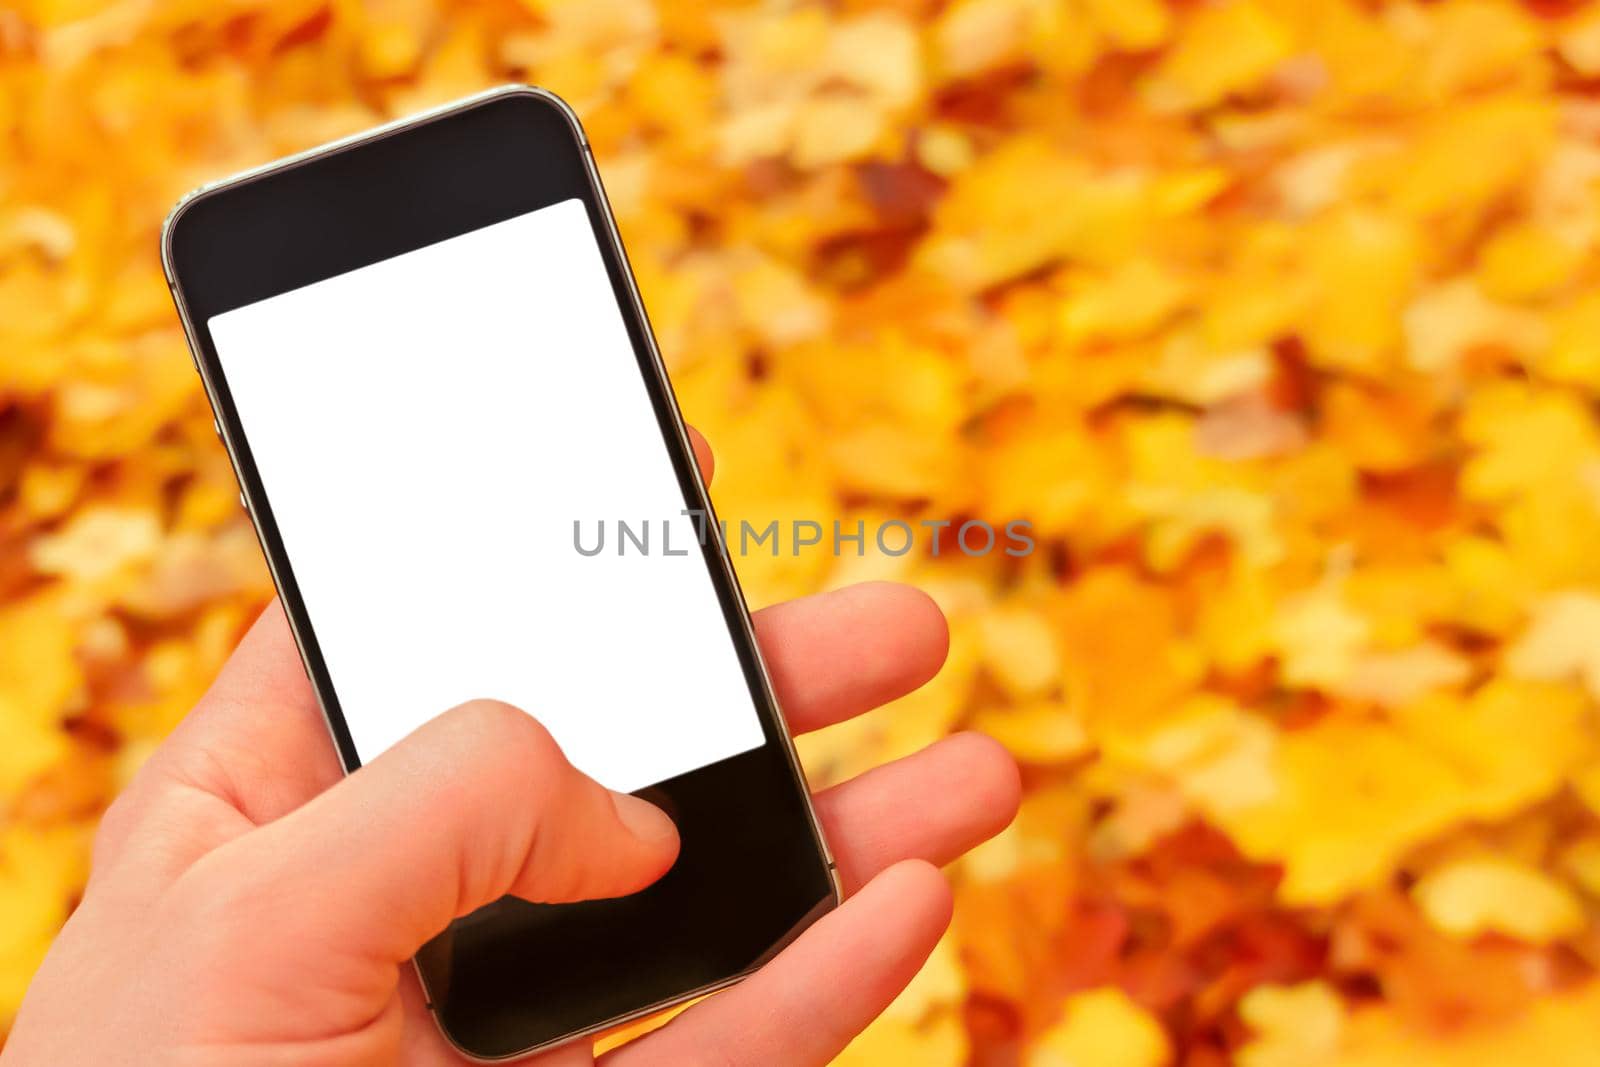 Autumn mobile phone mockup hand holding smartphone nature phone screen mockup smartphone blank screen hand phone blur background leaves falling sale mobile. Fallen leaves autumn background fall nature by synel